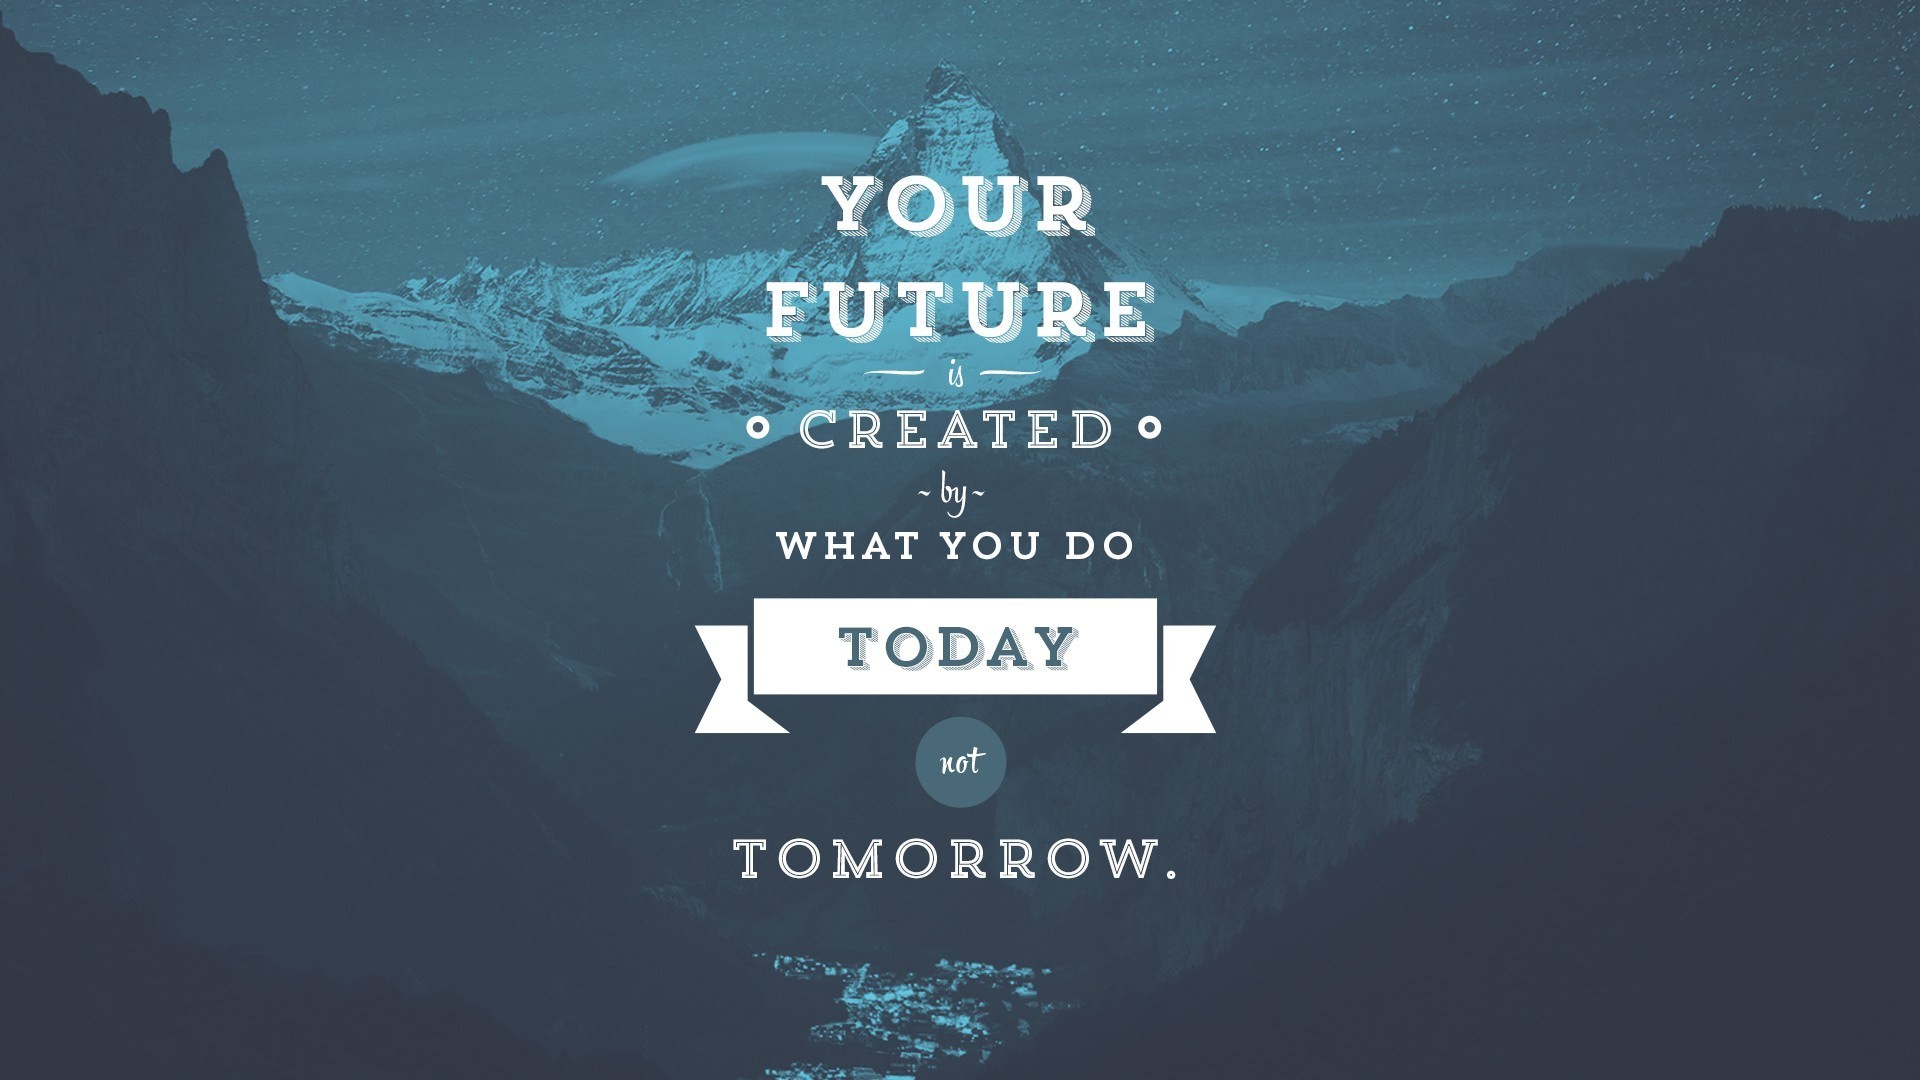 1920x1080 Motivational Wallpaper on Future: Your future is created by what you do  Today not tomorrow